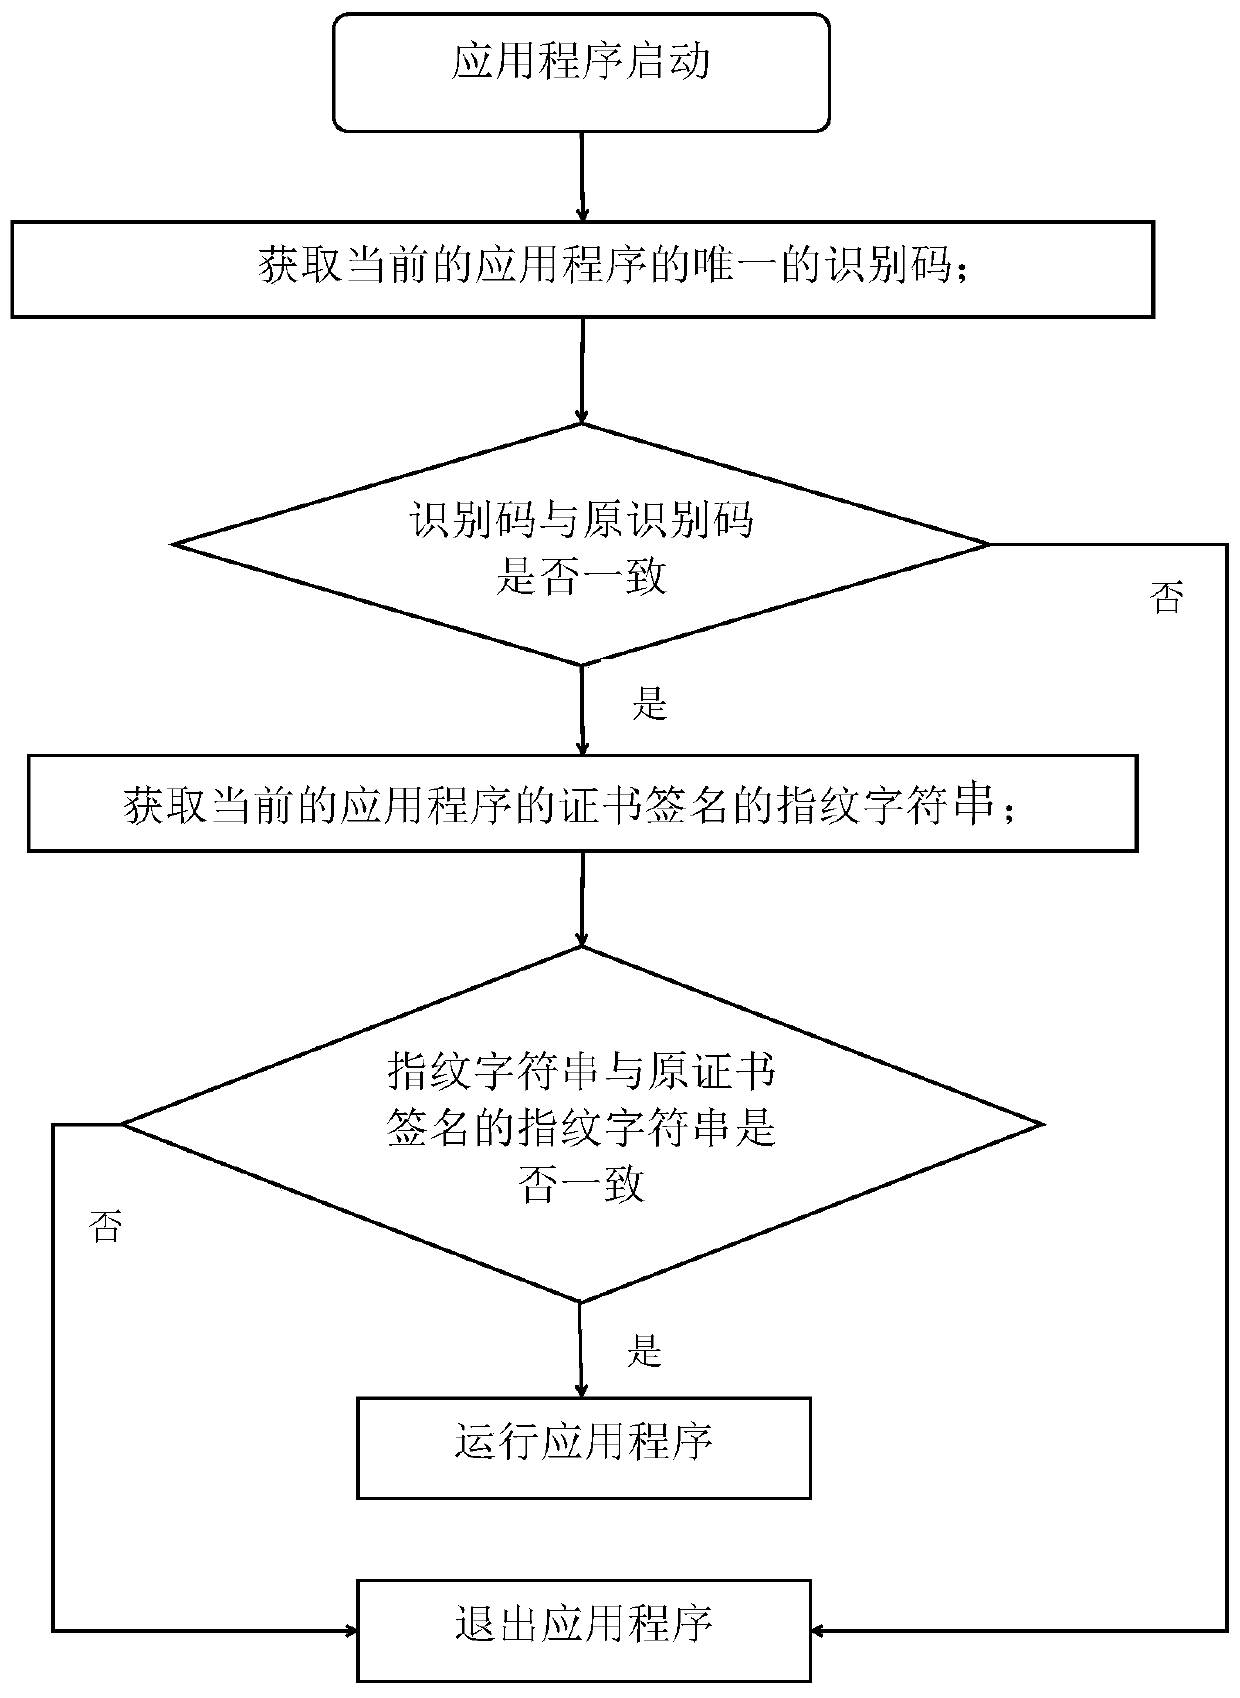 Method and system for preventing application program from being secondarily packaged